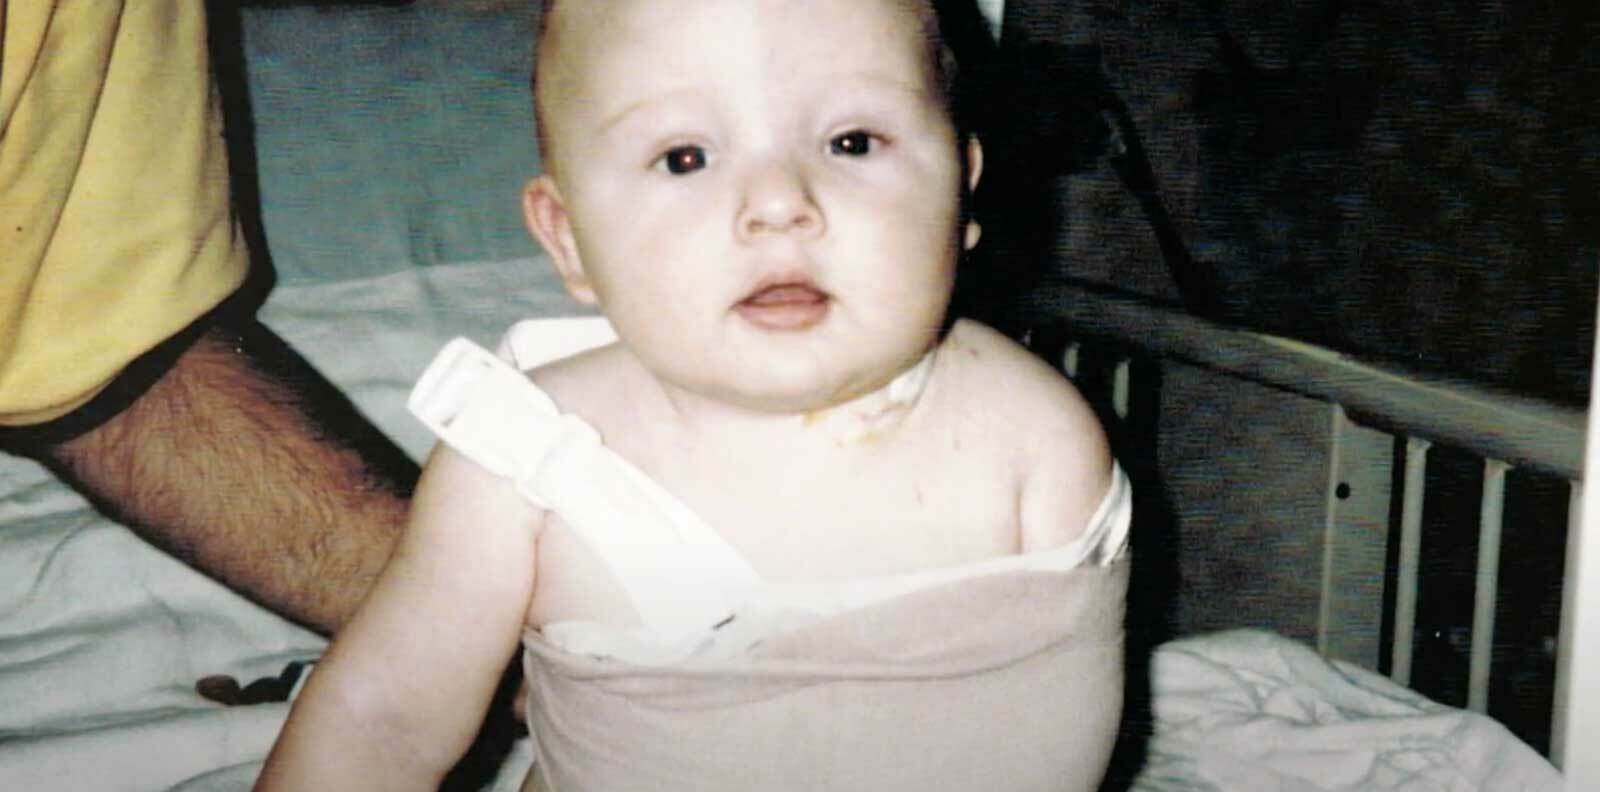 Home photo of a baby wearing an arm sling.